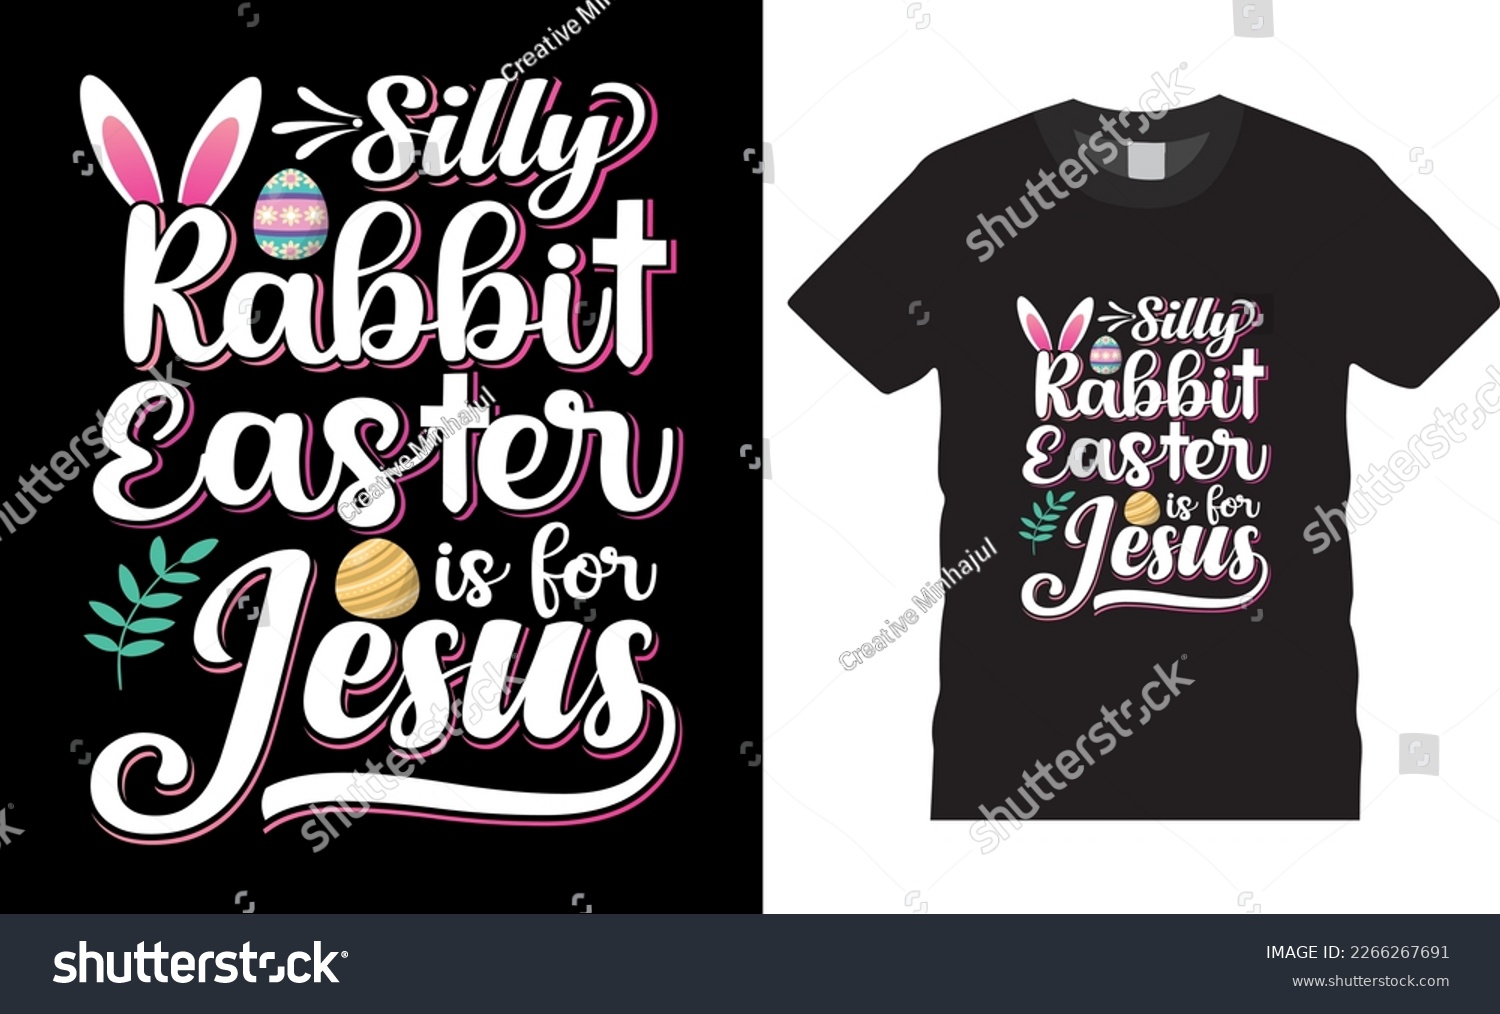 SVG of Happy easter rabbit, bunny tshirt vector design template. Silly rabbit easter is for jesus t-shirt design.Ready to print for apparel, poster, mug and greeting plate illustration. svg